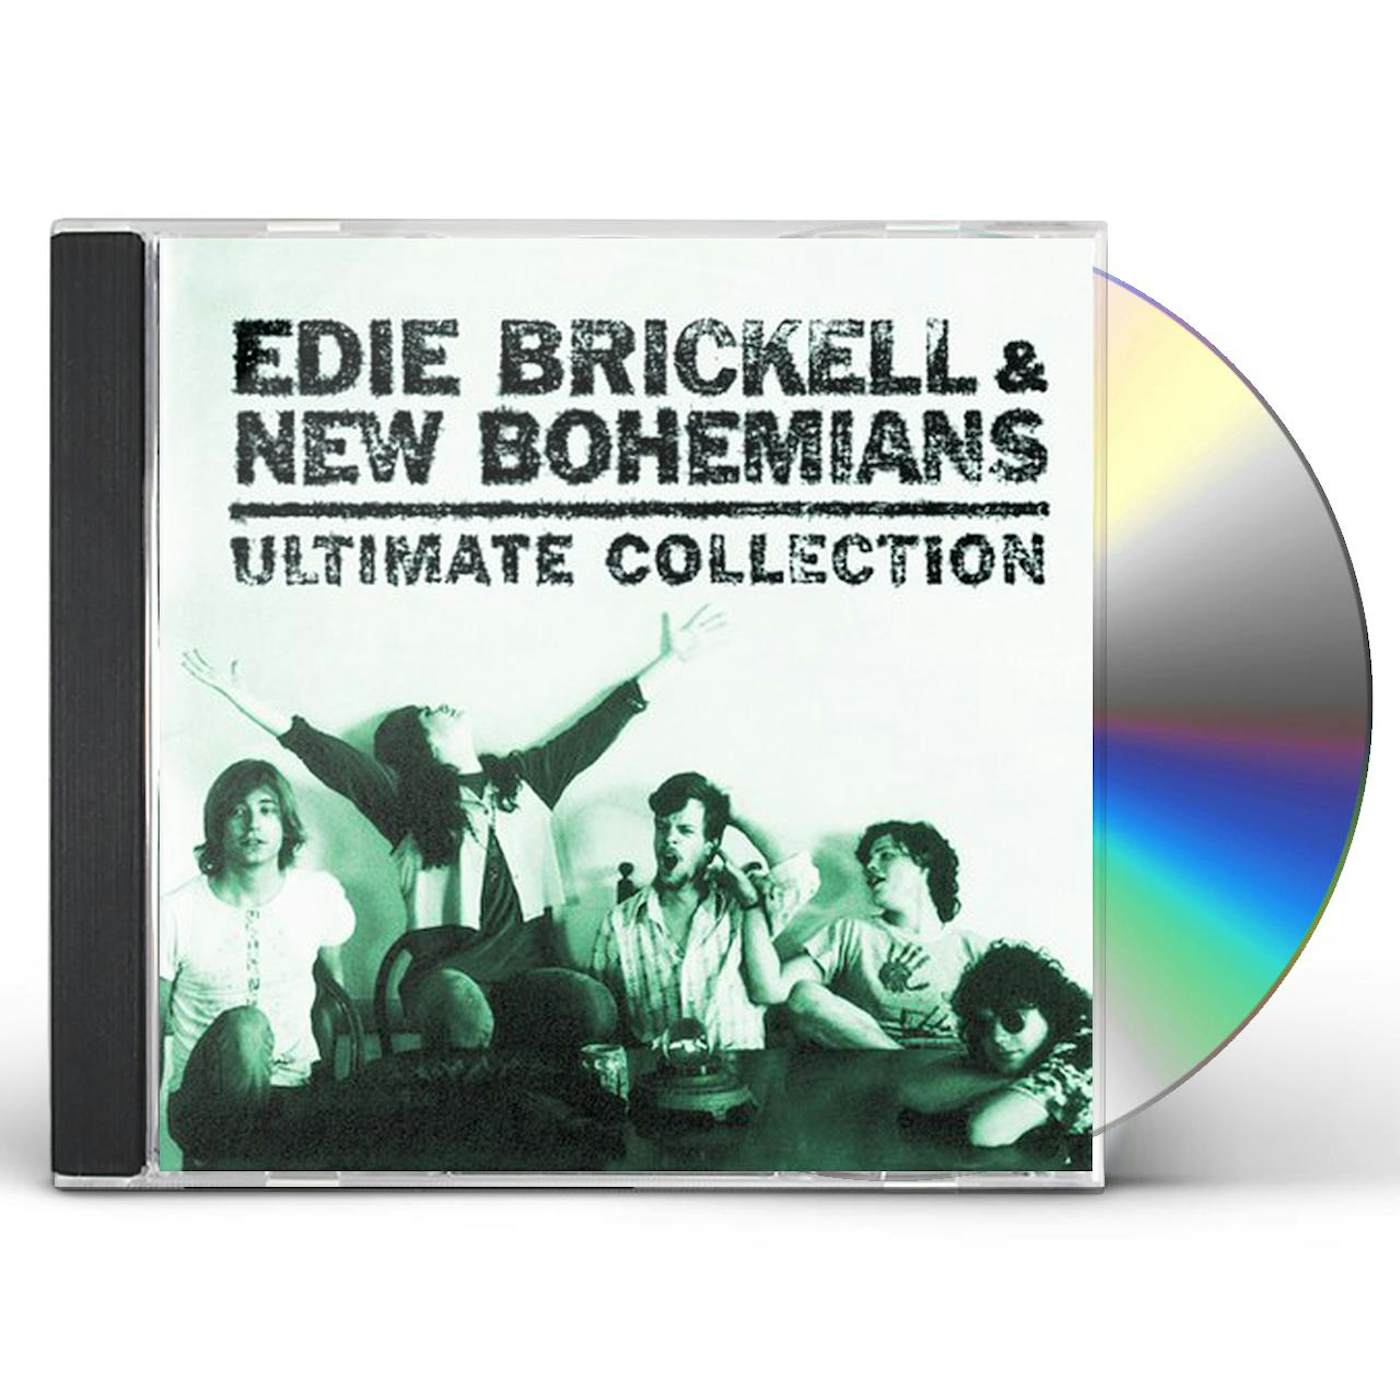 Edie Brickell & New Bohemians ULTIMATE COLLECTION CD